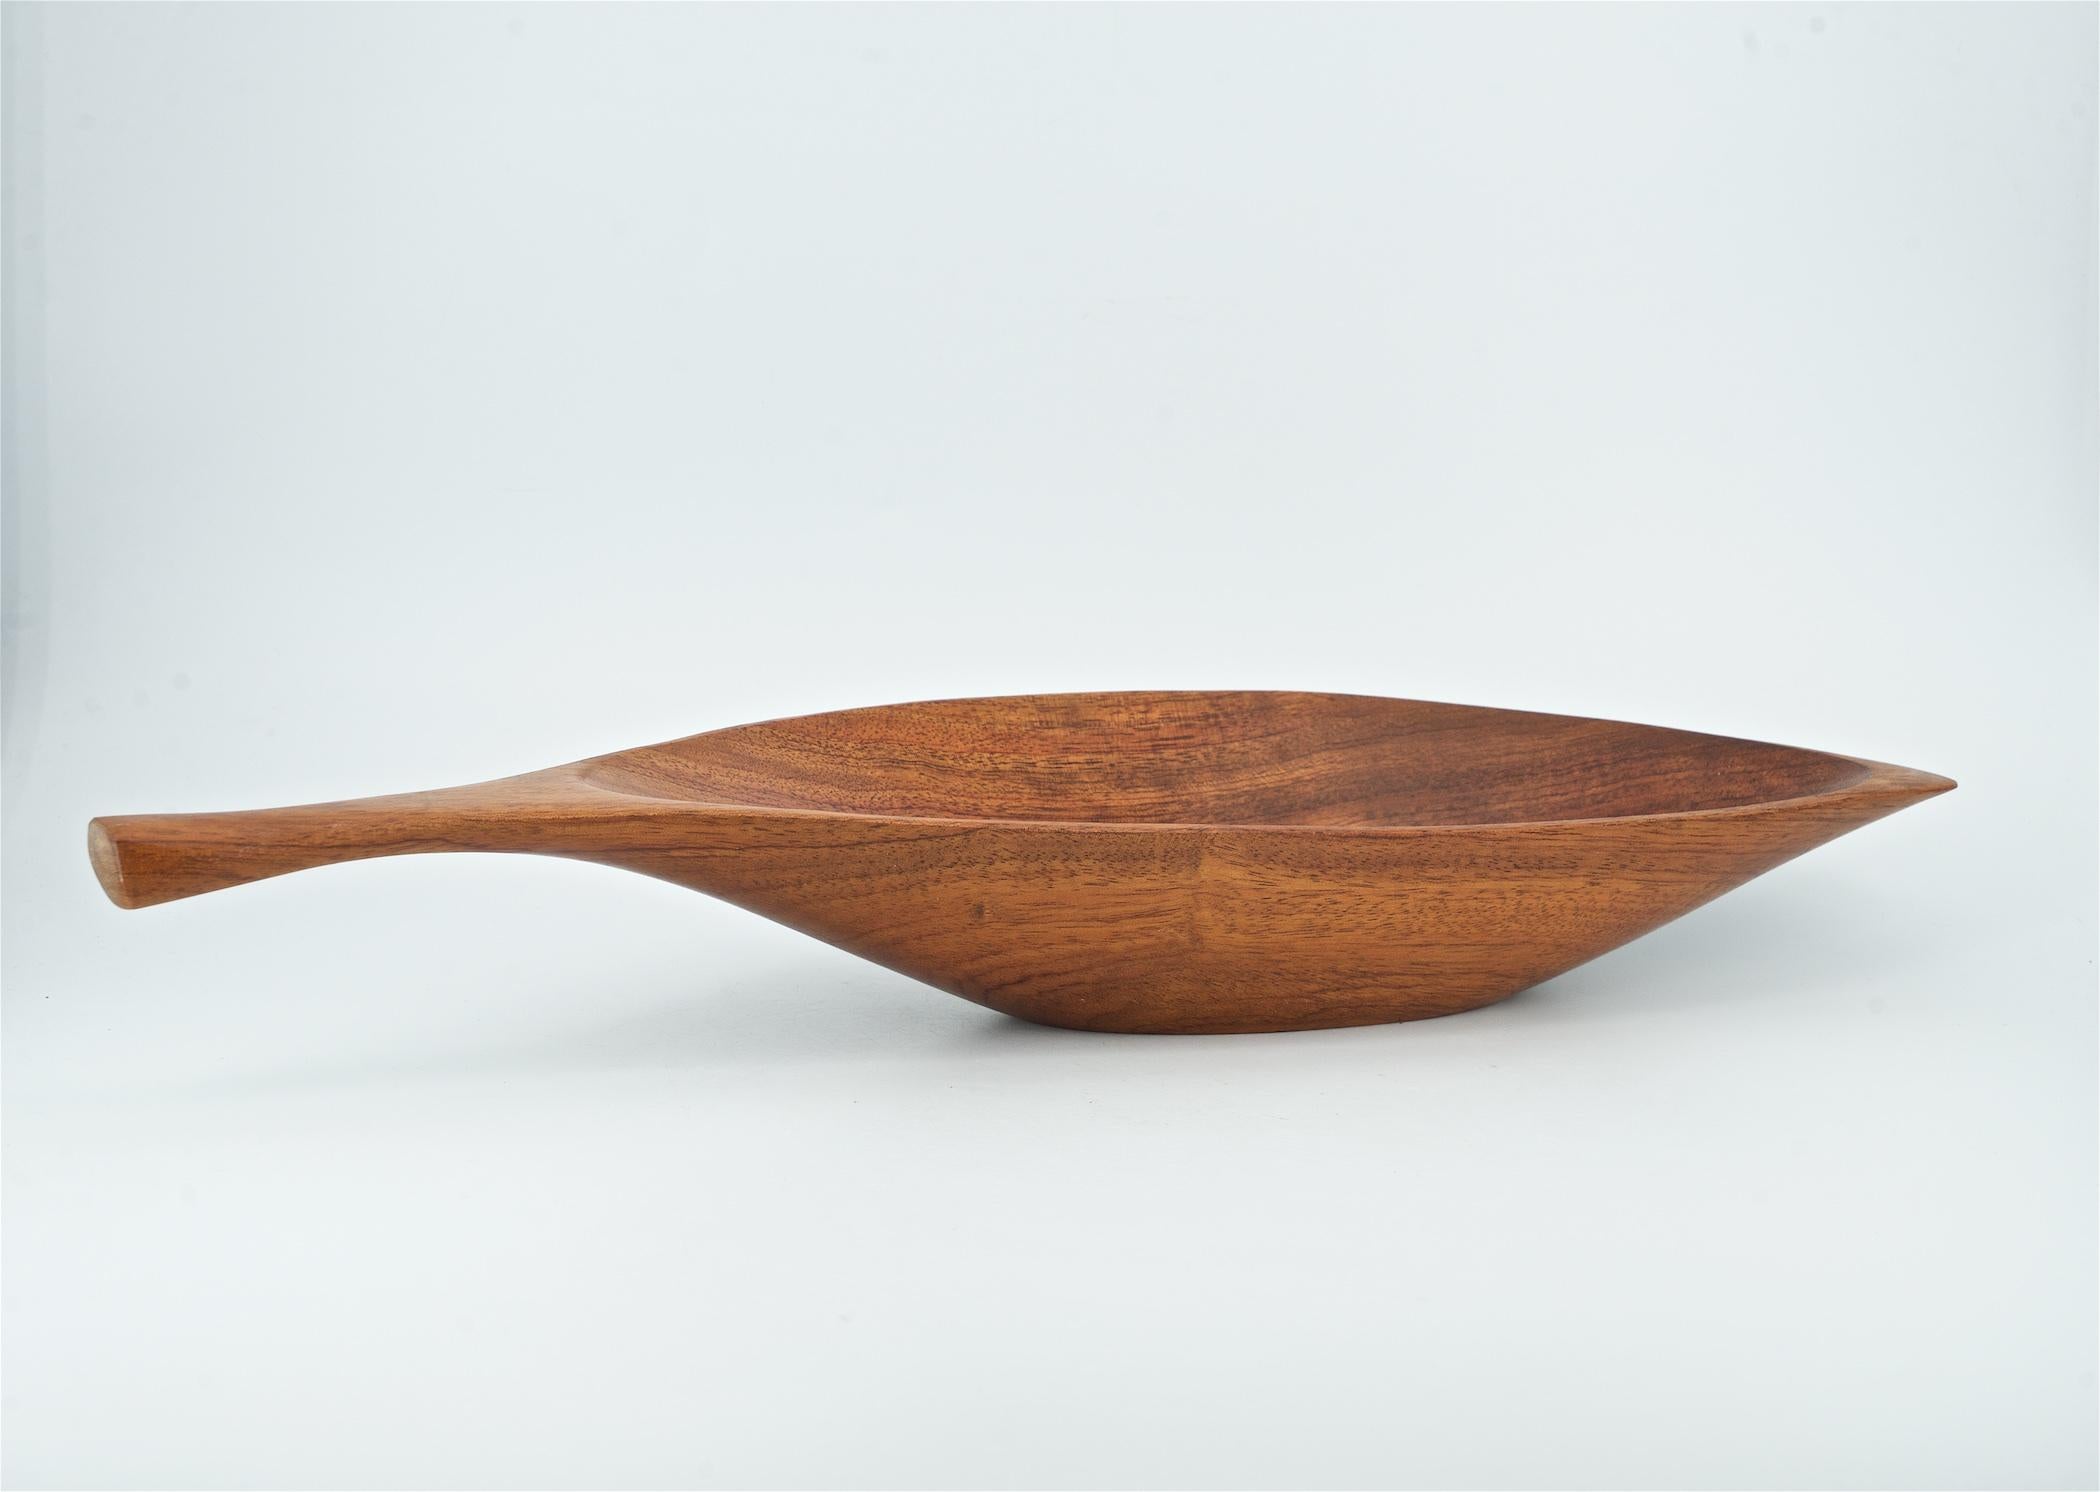 Late 20th Century Centerpiece Rare Wood Fruit Bowl Mid 20th Century American Craftsman Design For Sale